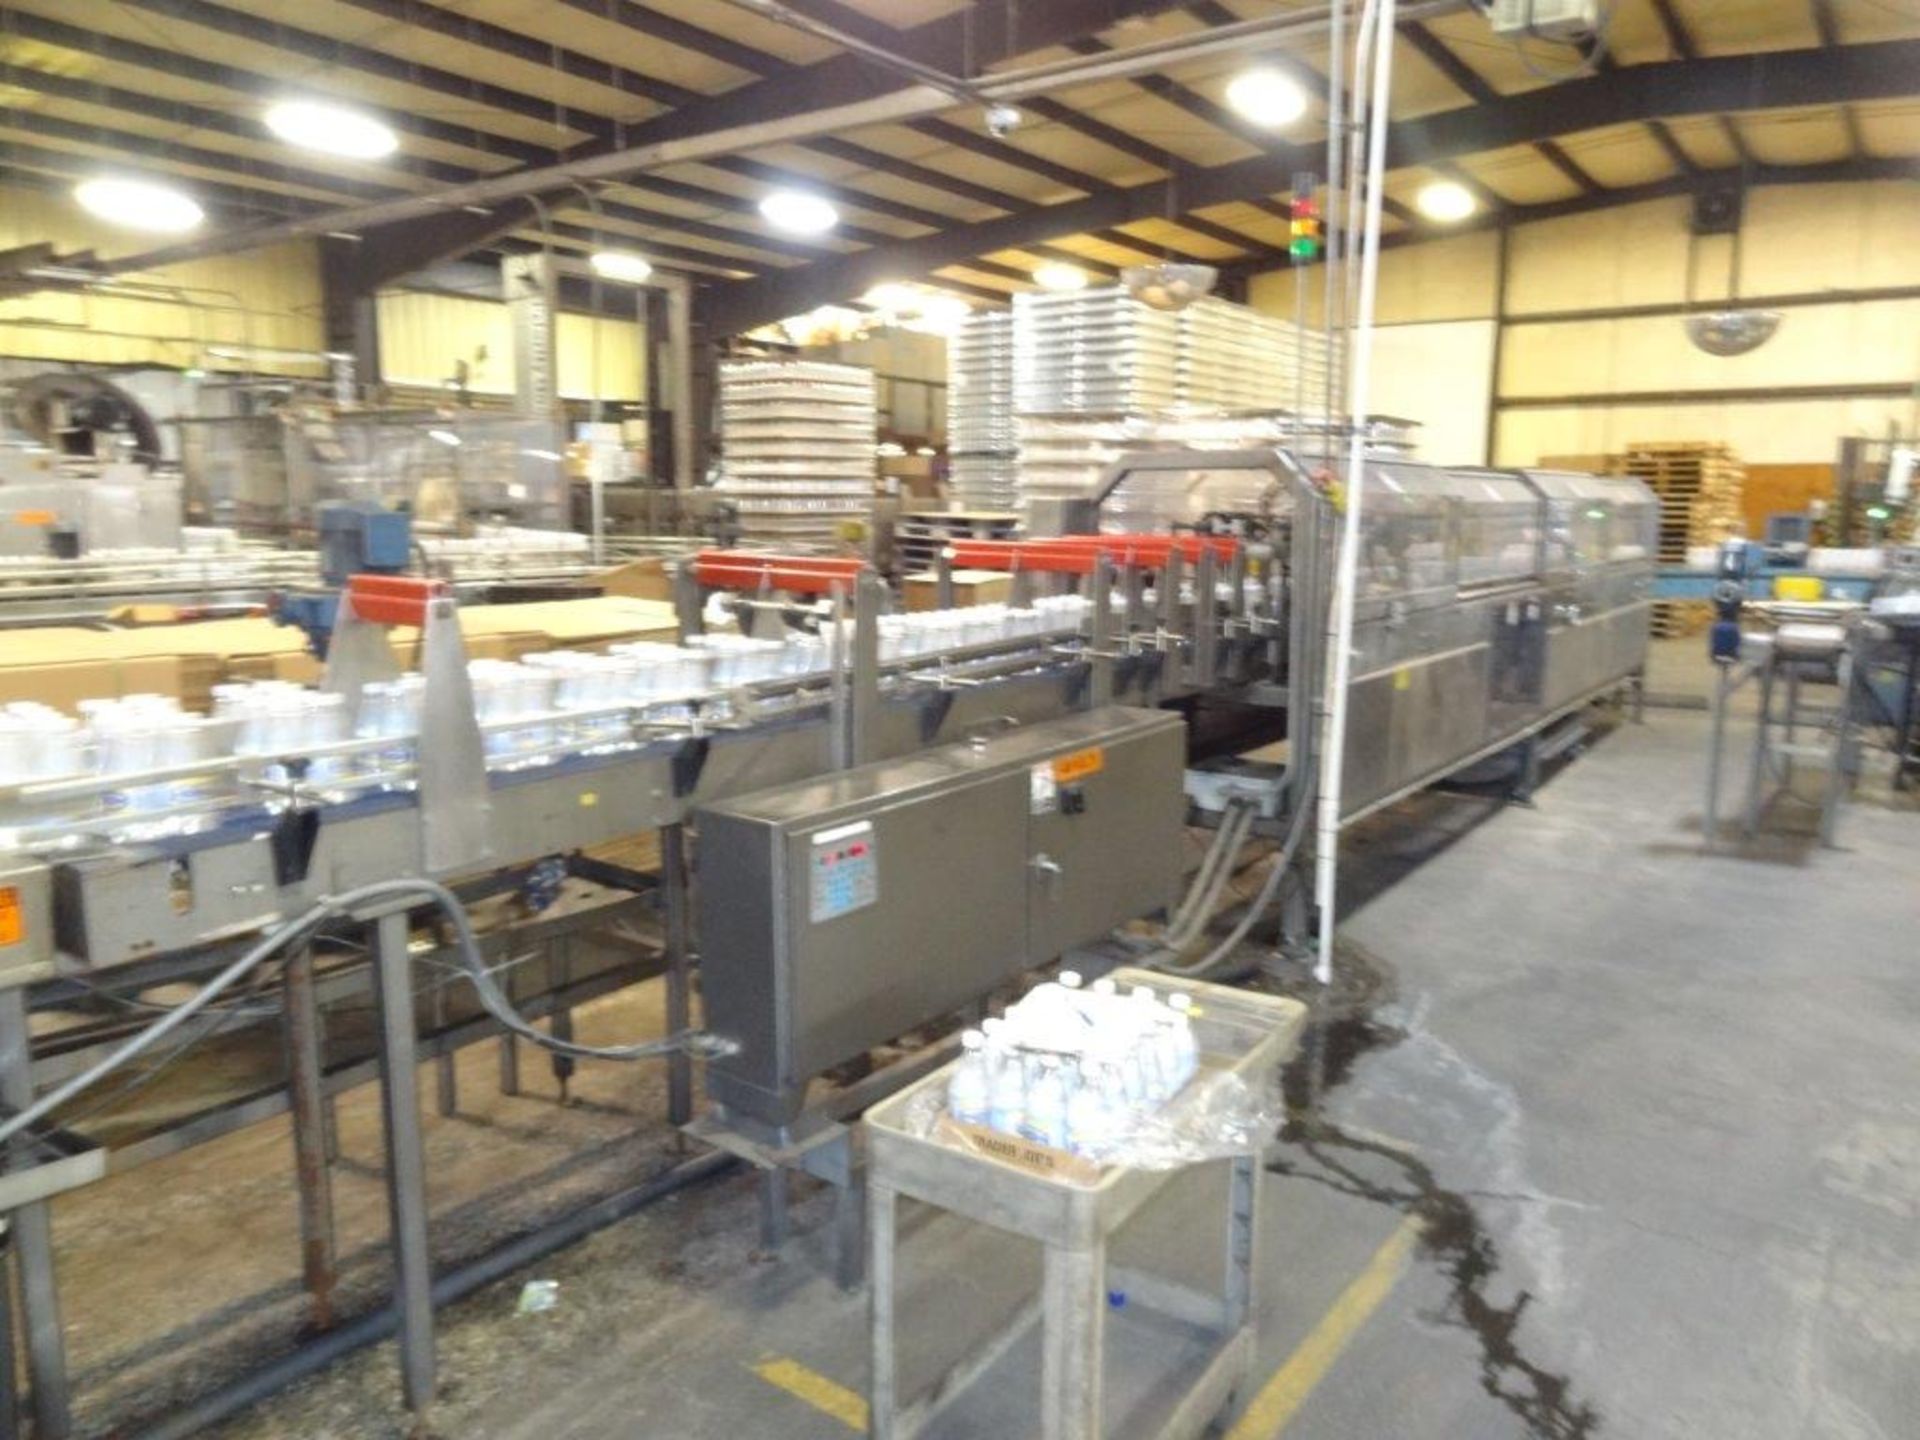 Arpac Traystar TS-2000 Series High Speed Continuous Motion Wrap-around Trayloader | Rigging: $1500 - Image 3 of 12